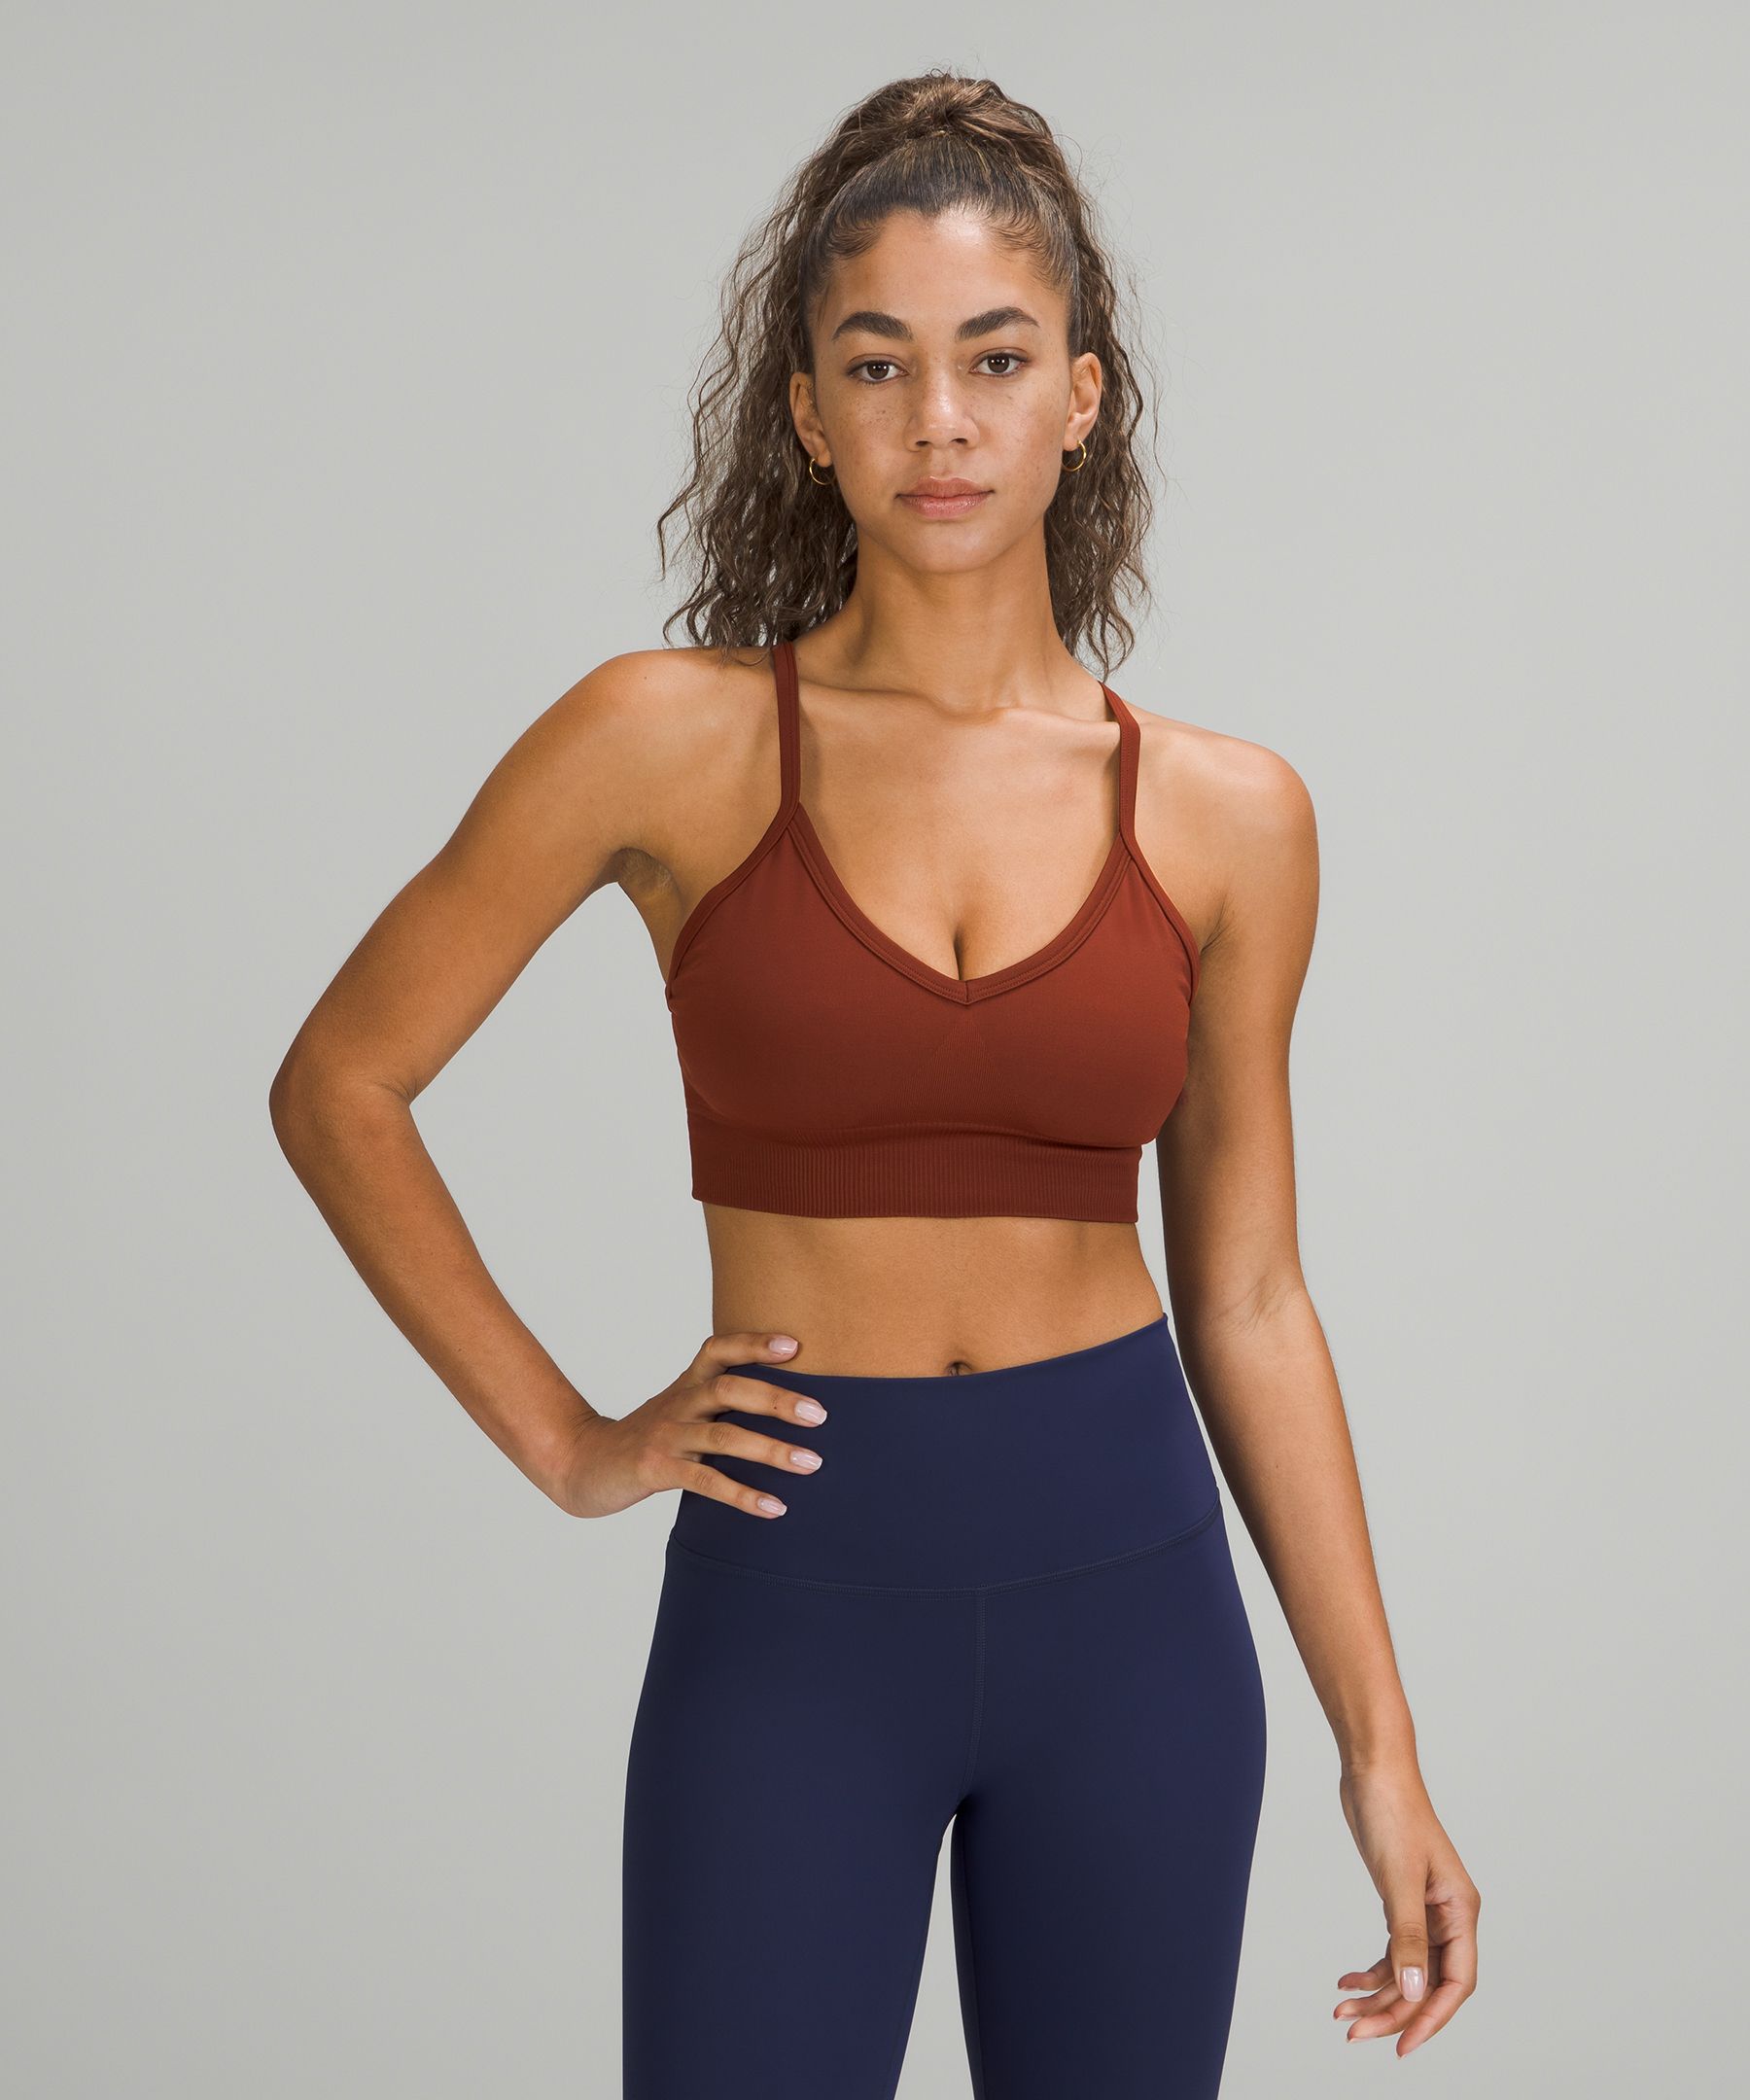 Copper Fit™ Sports Bra with Adjustable Straps, Teal, Large